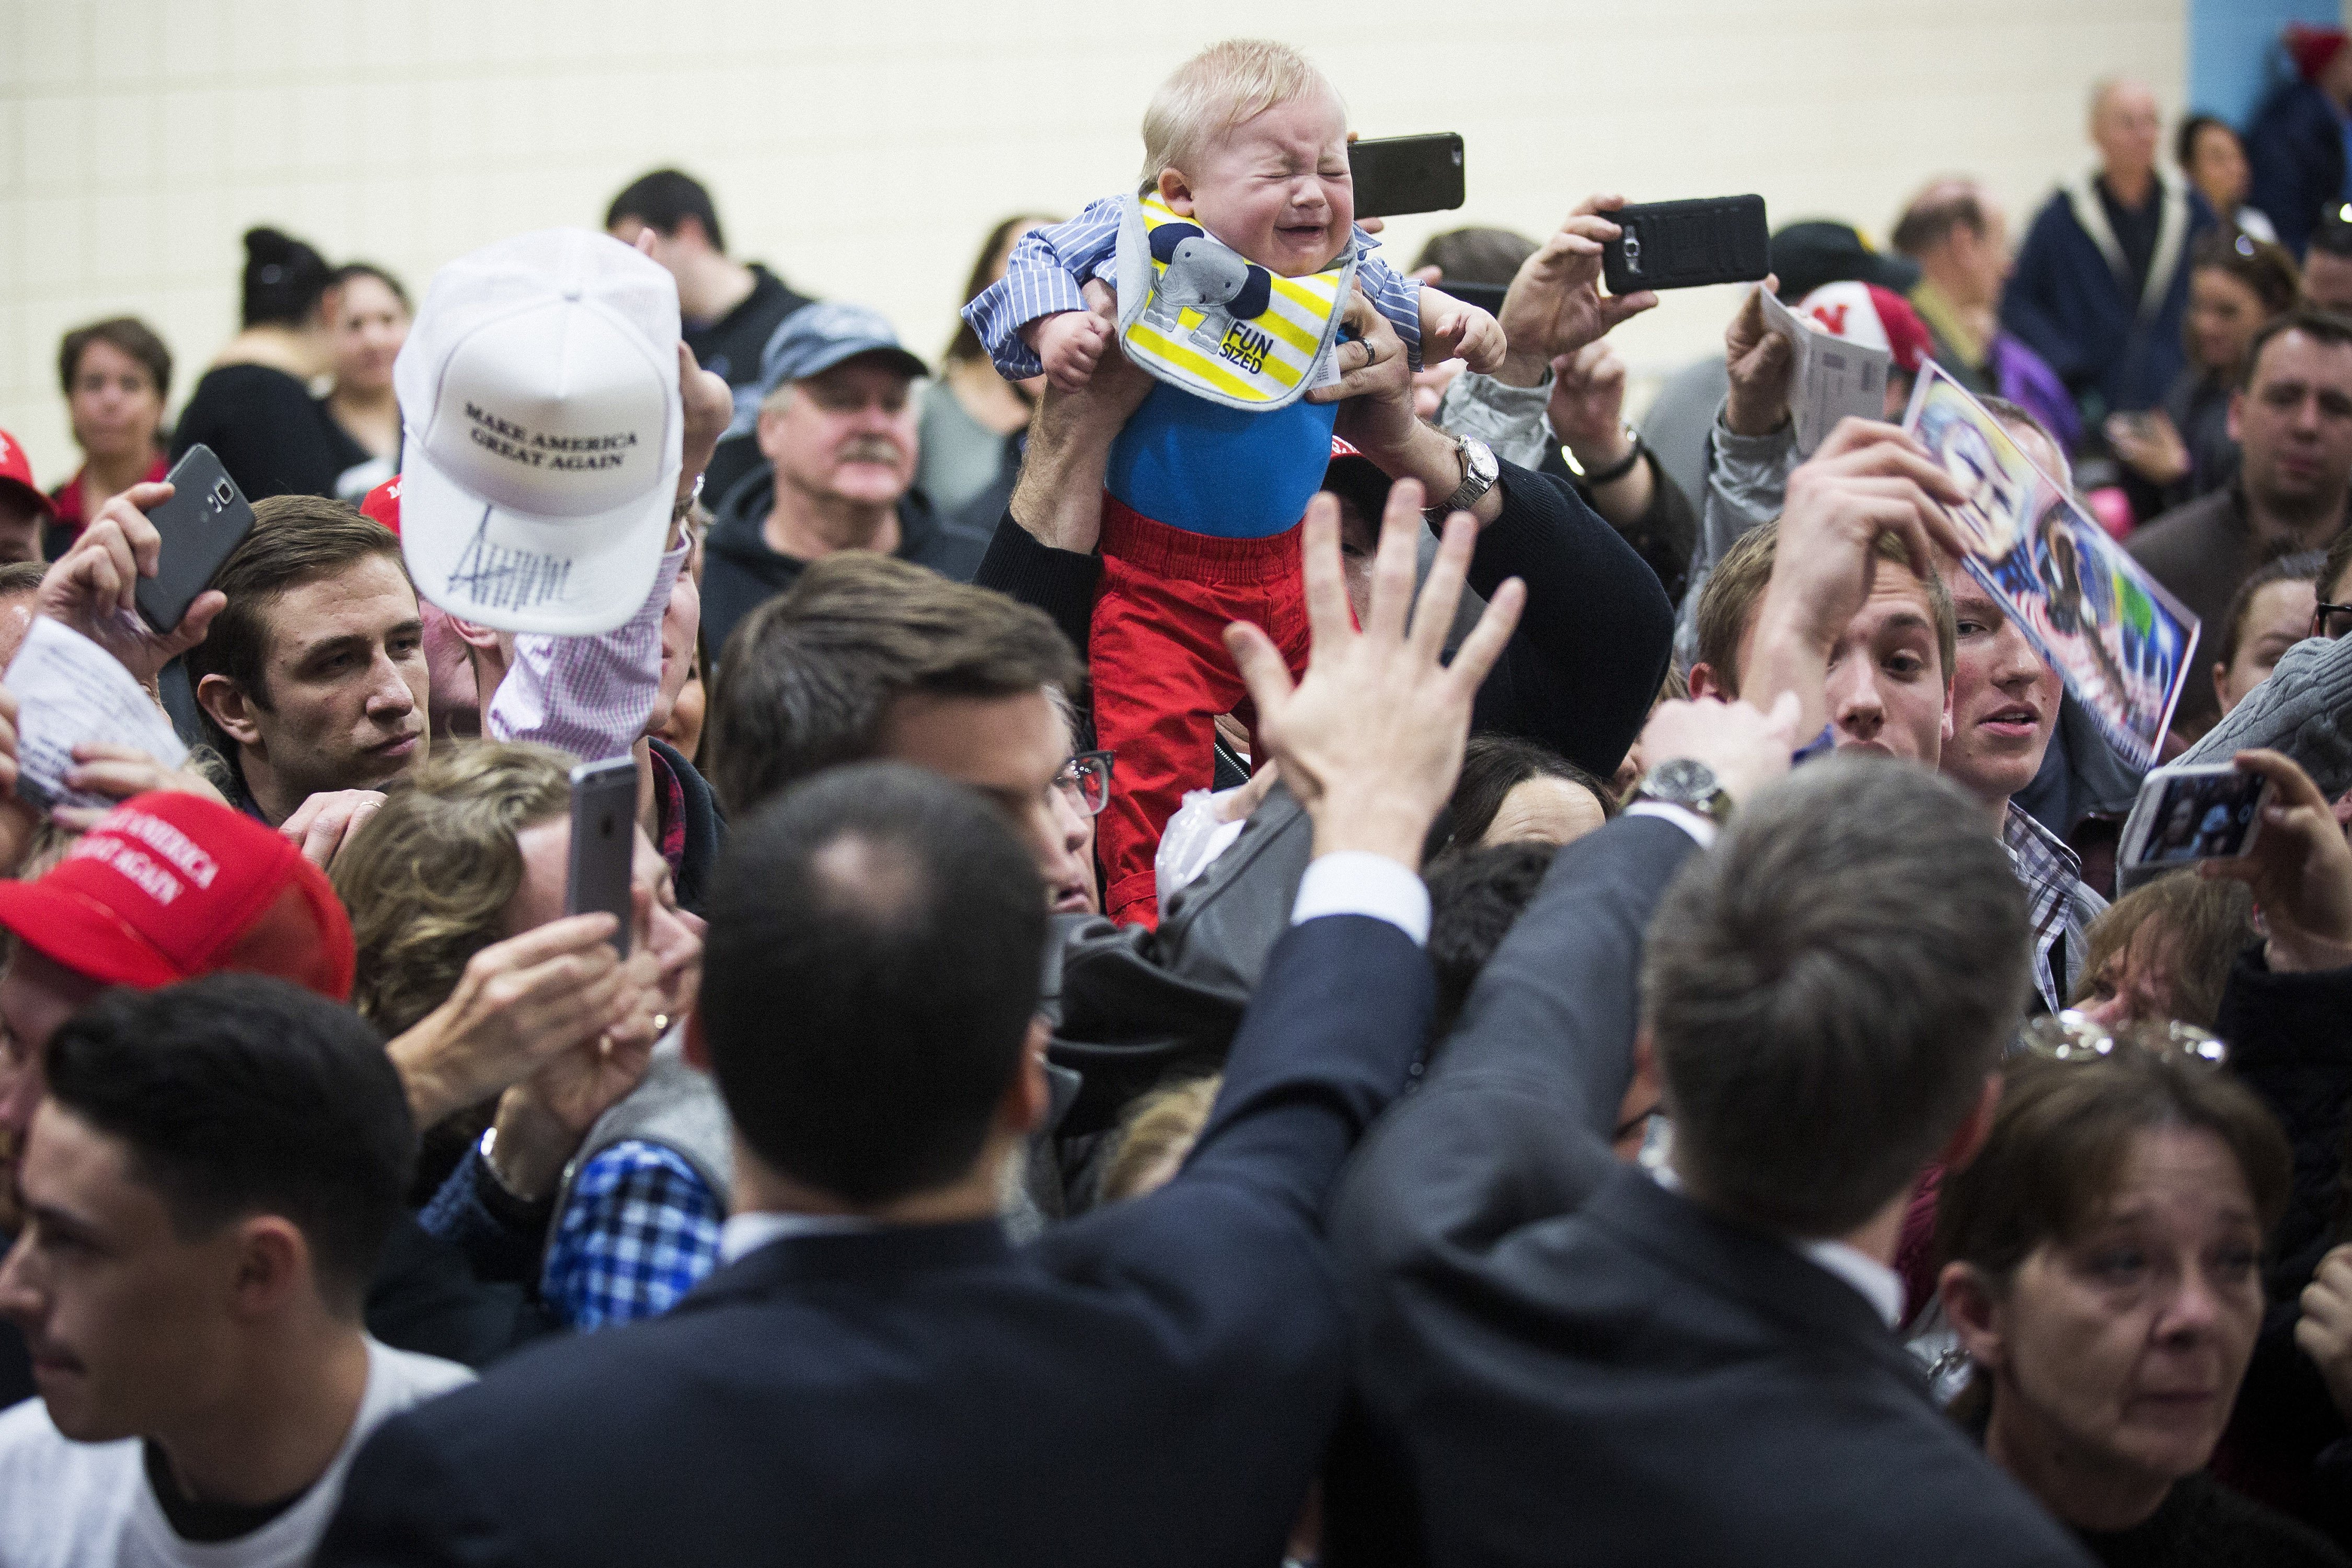 Supporters wait to greet Republican presidential candidate Donald Trump during a campaign event in Council Bluffs, Iowa, on Jan. 31, 2016.